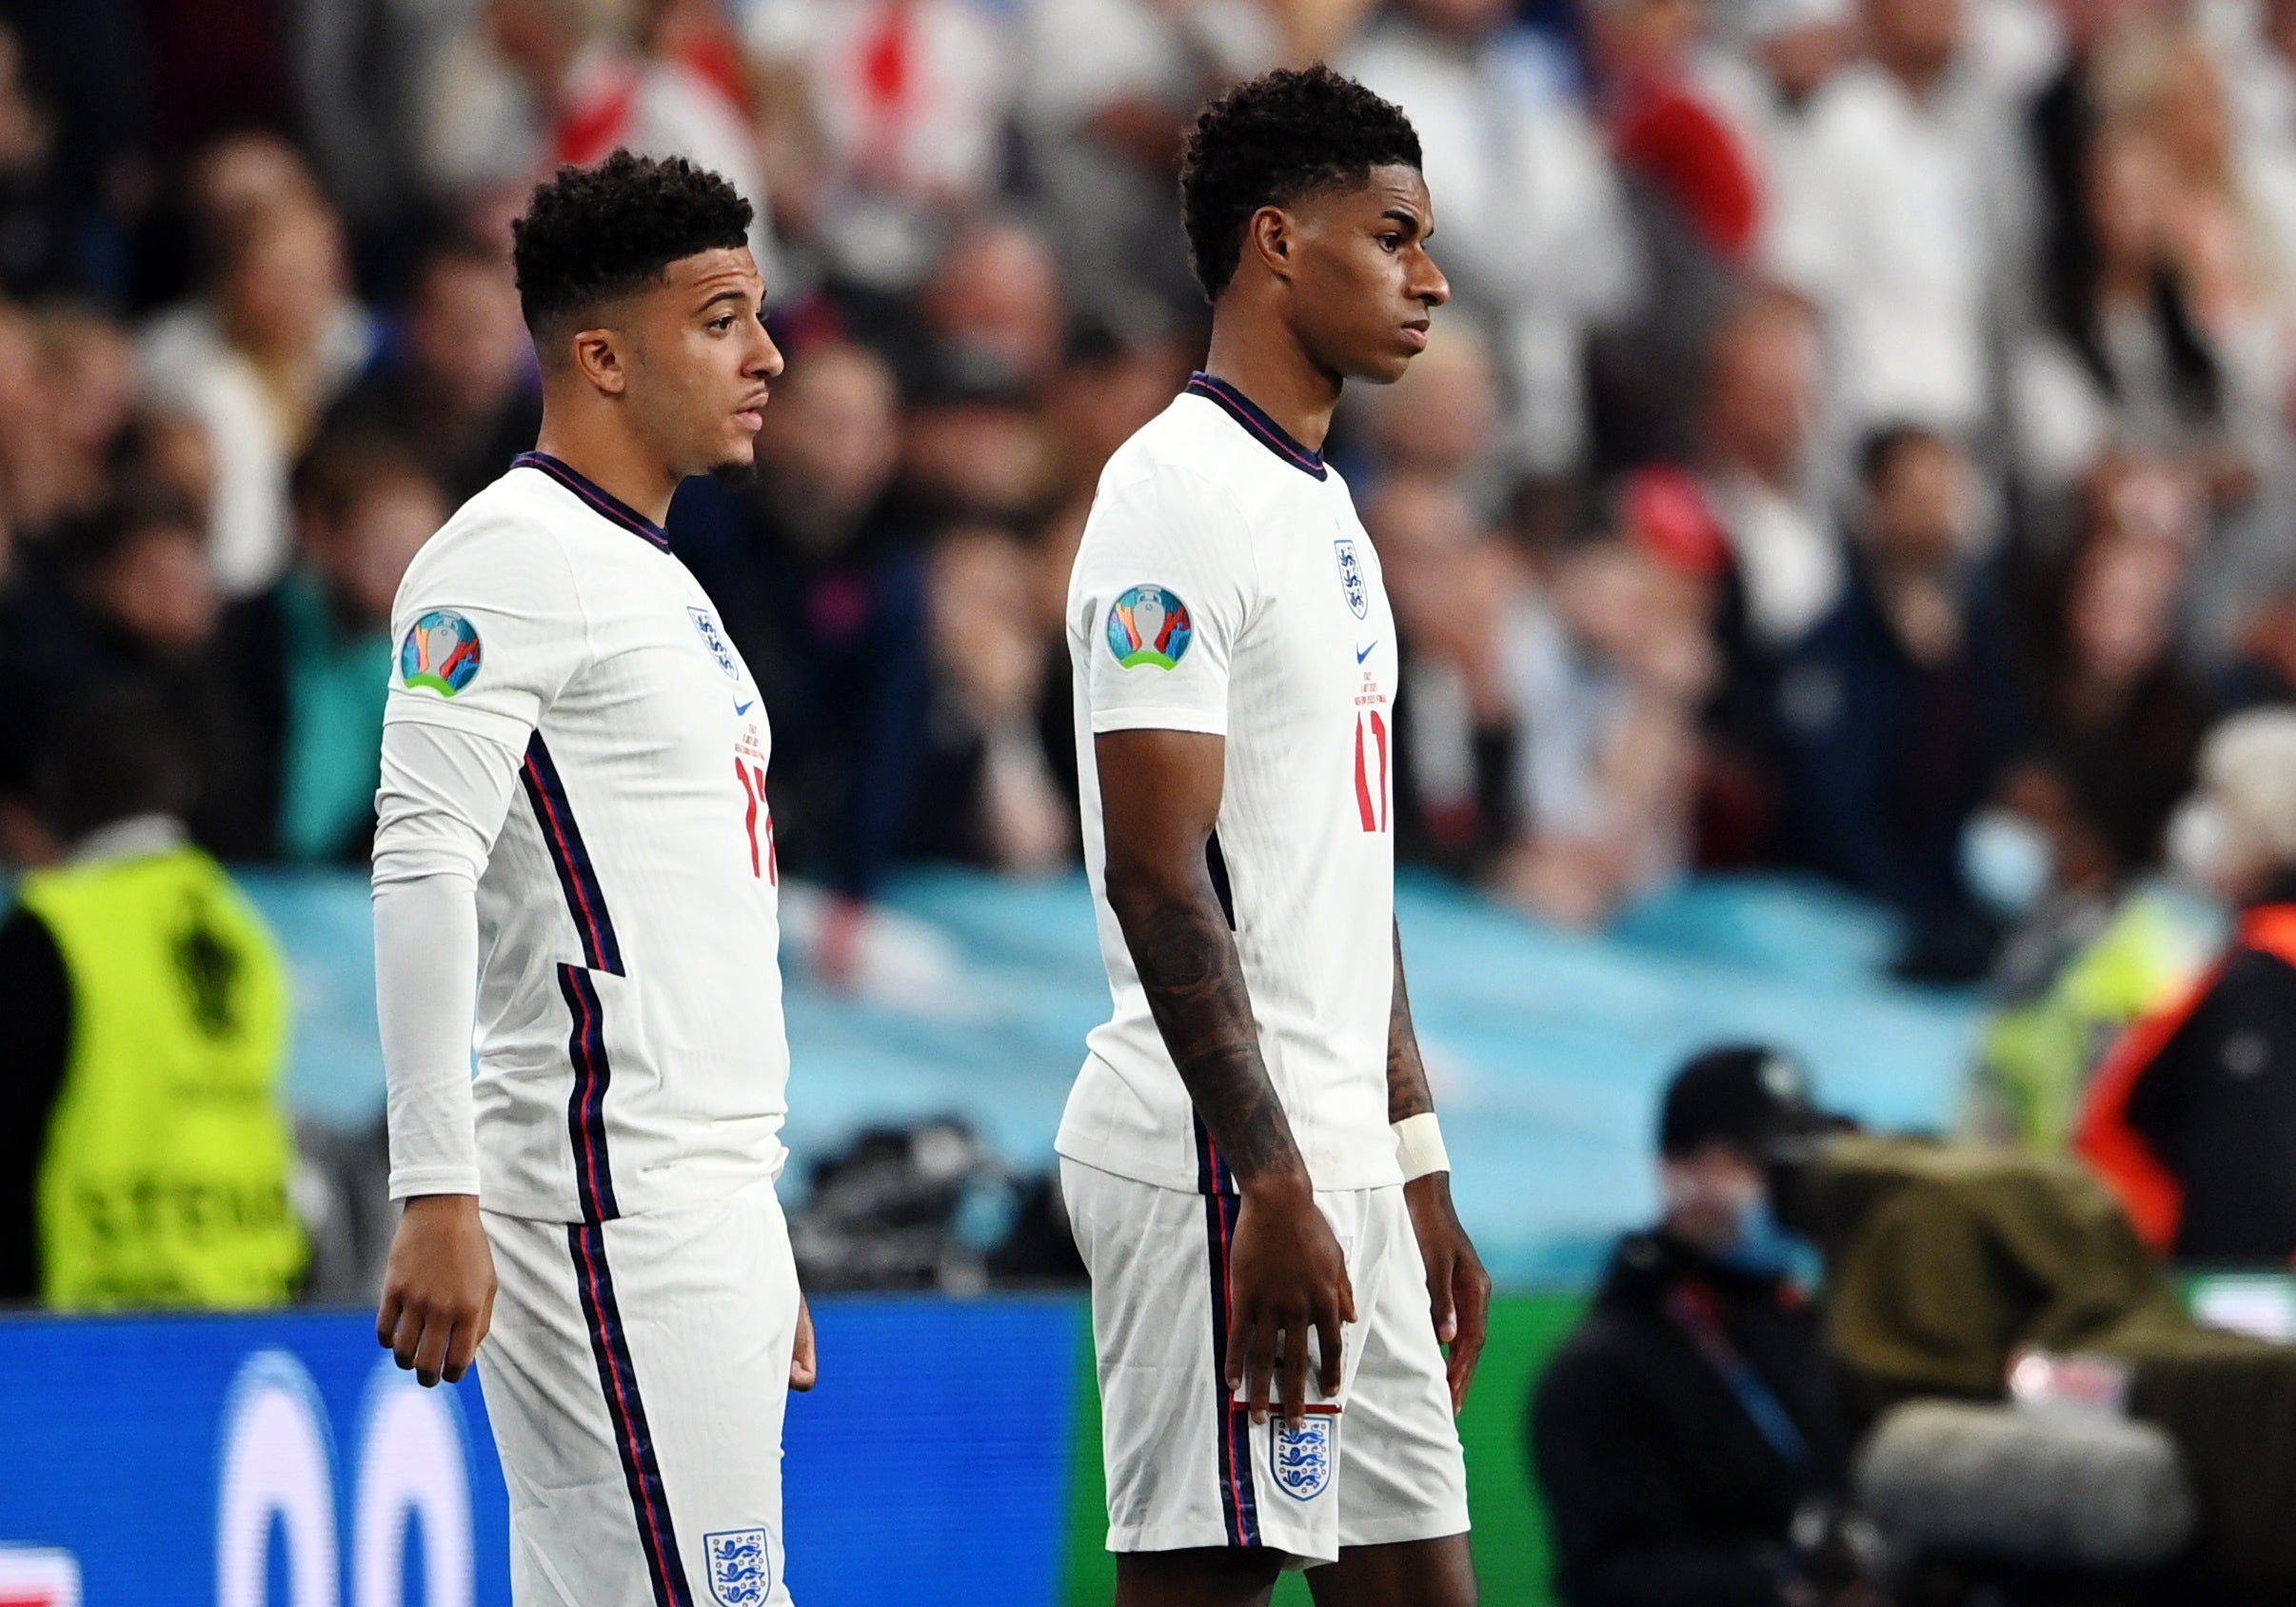 England players Jadon Sancho and Marcus Rashford who, along with Bukayo Saka, received racist abuse on social media after the team’s Euro 2020 final defeat